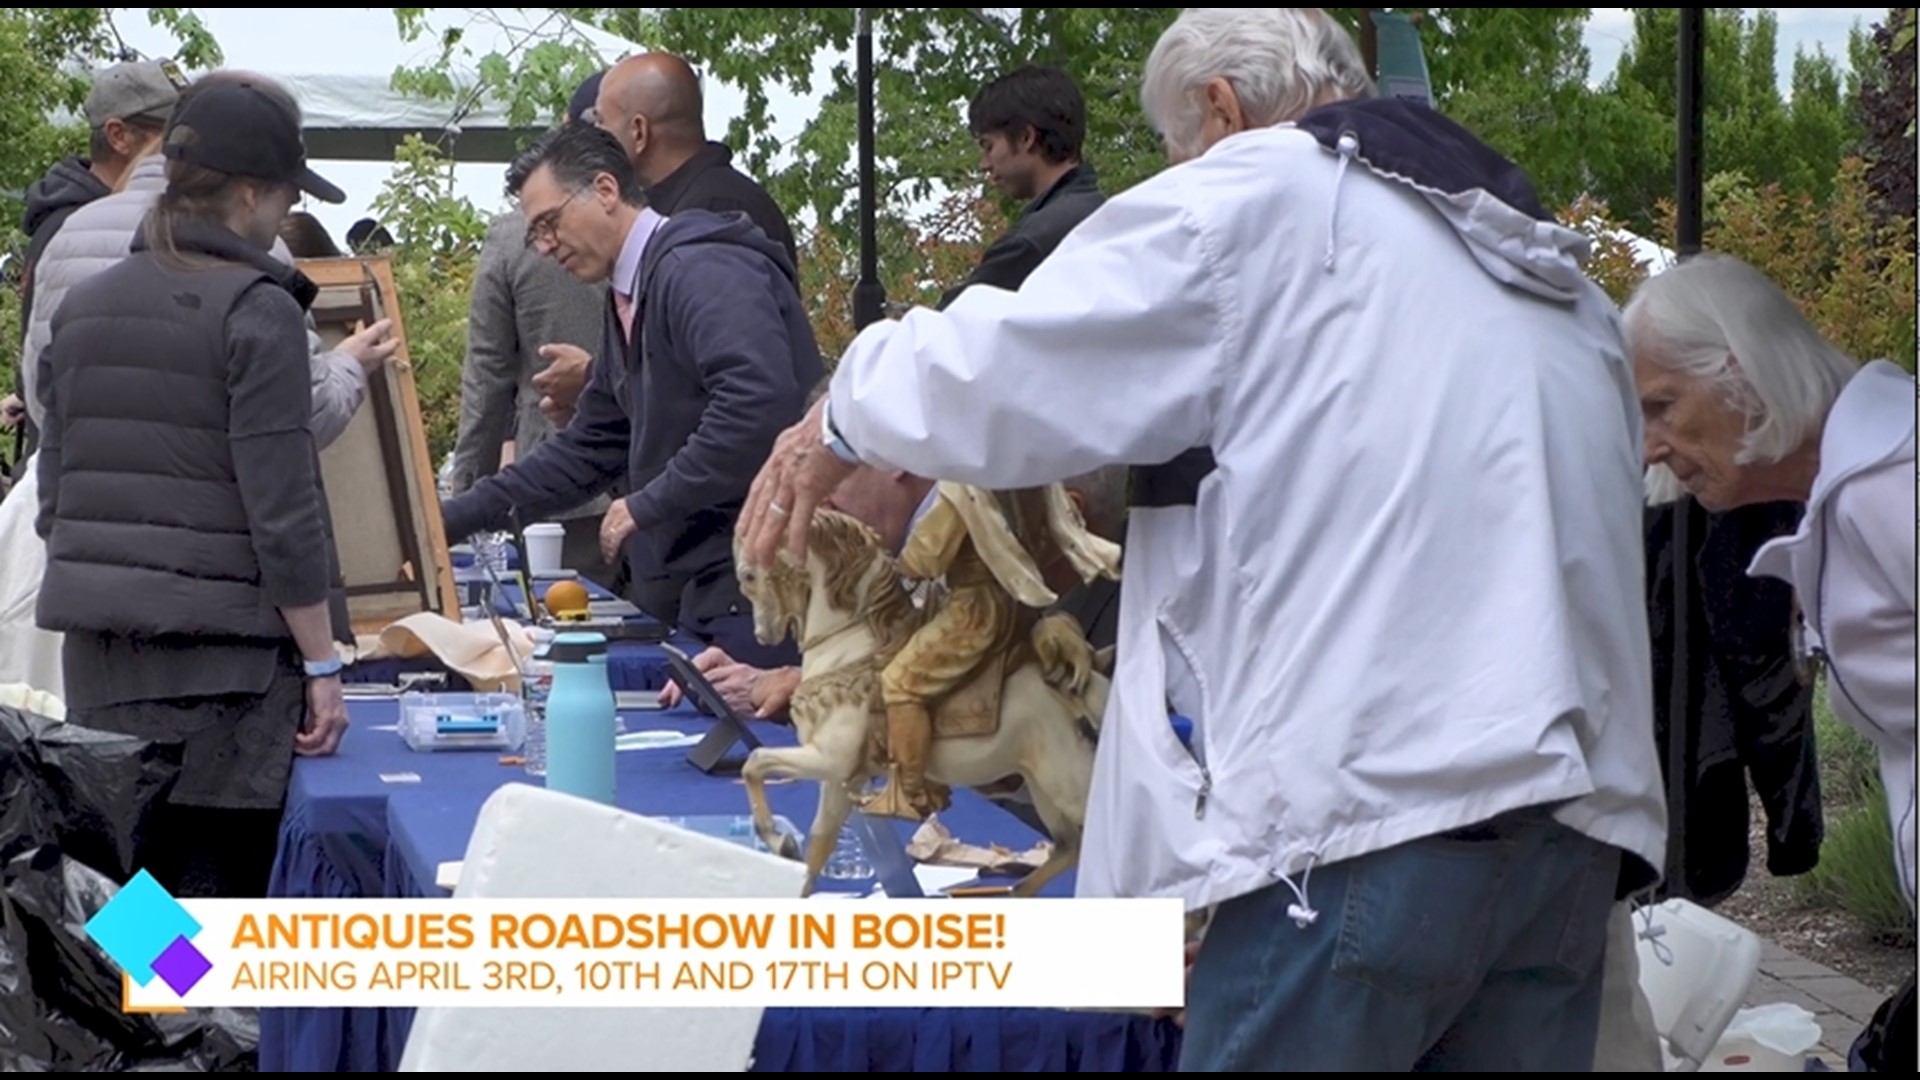 Antiques Roadshow in Boise airs April 3rd, 10th, and 17th on IPTV!